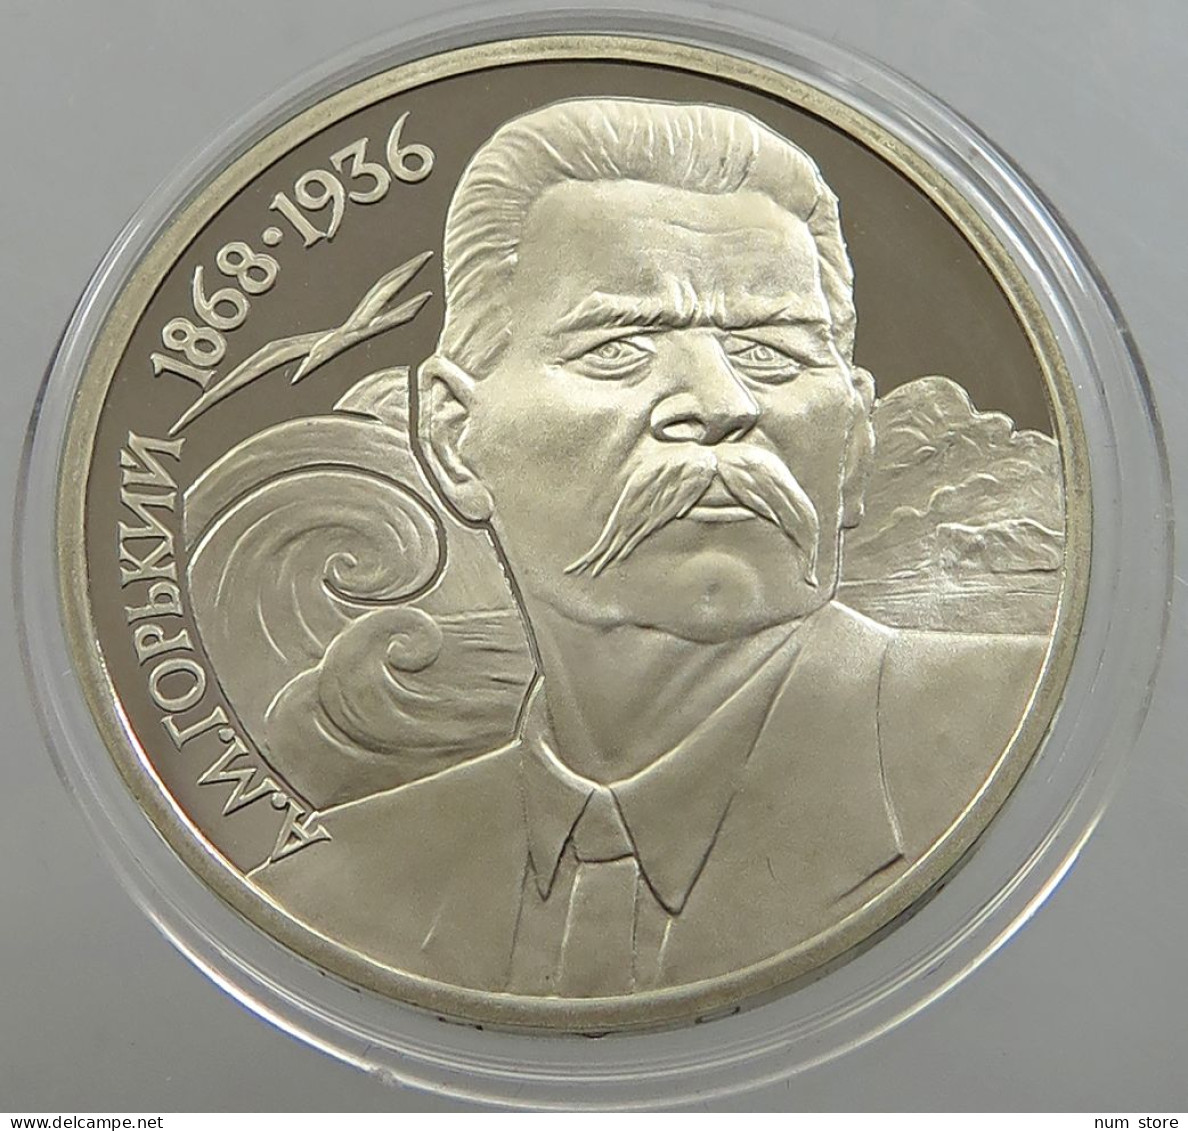 RUSSIA USSR 1 ROUBLE 1988 GORKI PROOF #sm14 0535 - Russland